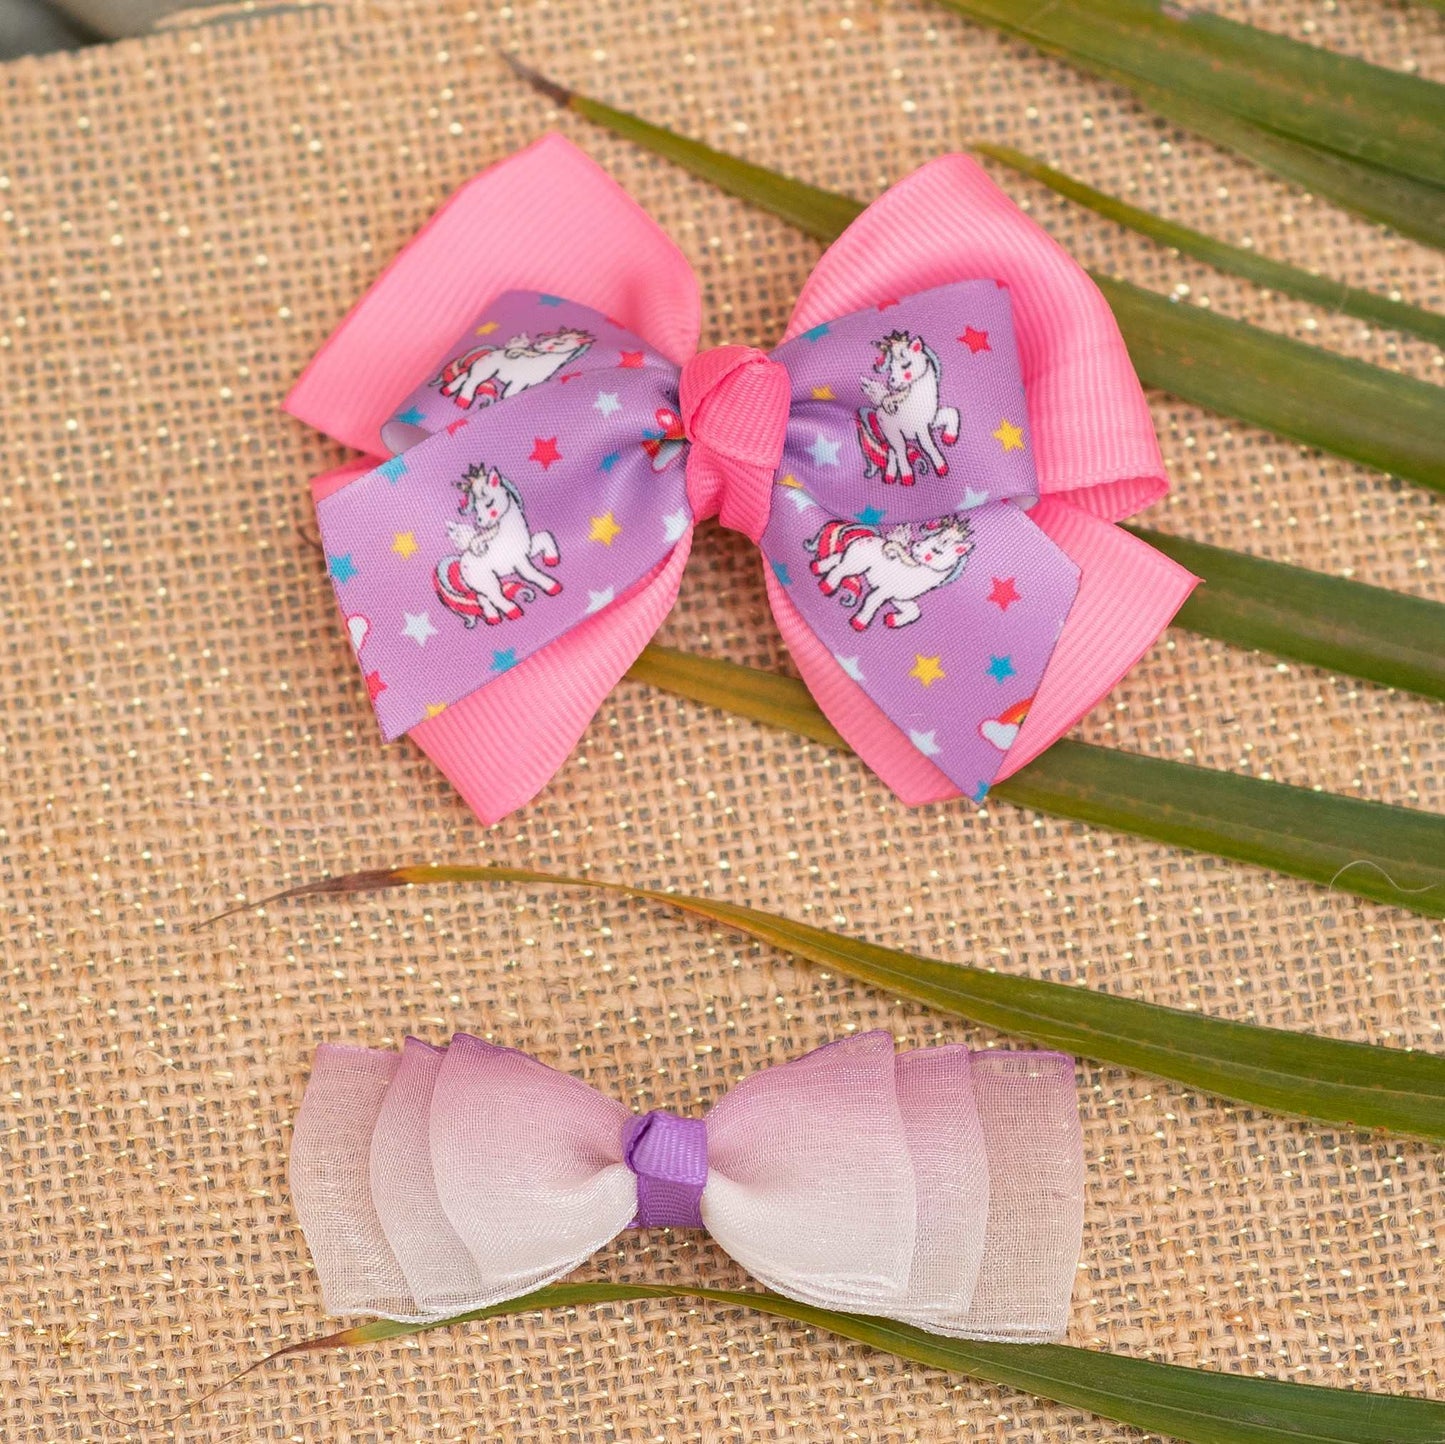 Combo: Cute shaded loopy bow  and unicorn printed bow on alligator - Purple, Pink and White  (2 single bow 2 quantity)